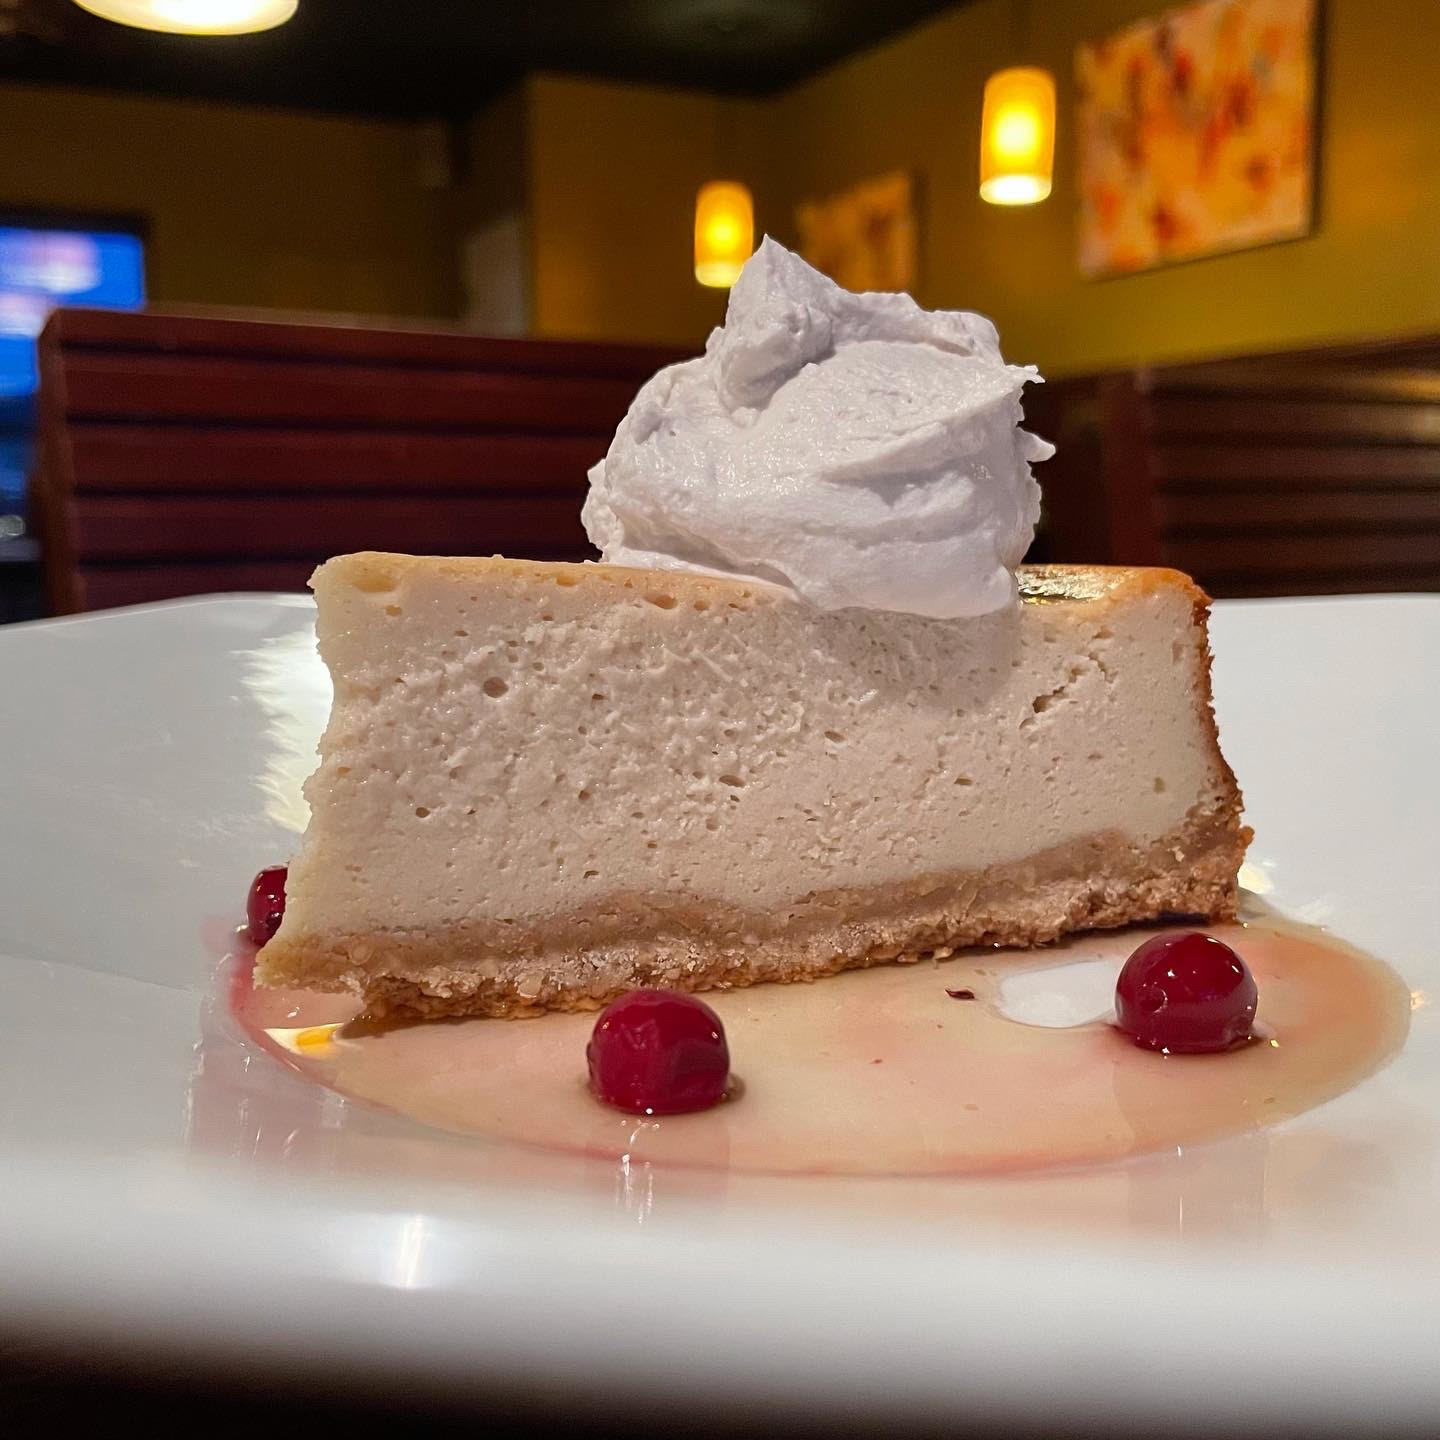 Toppings and crusts may vary on the award-winning cashew cheesecake made by Sprig & Vine pastry chef Linda Monastra, but the dessert is always a favorite.